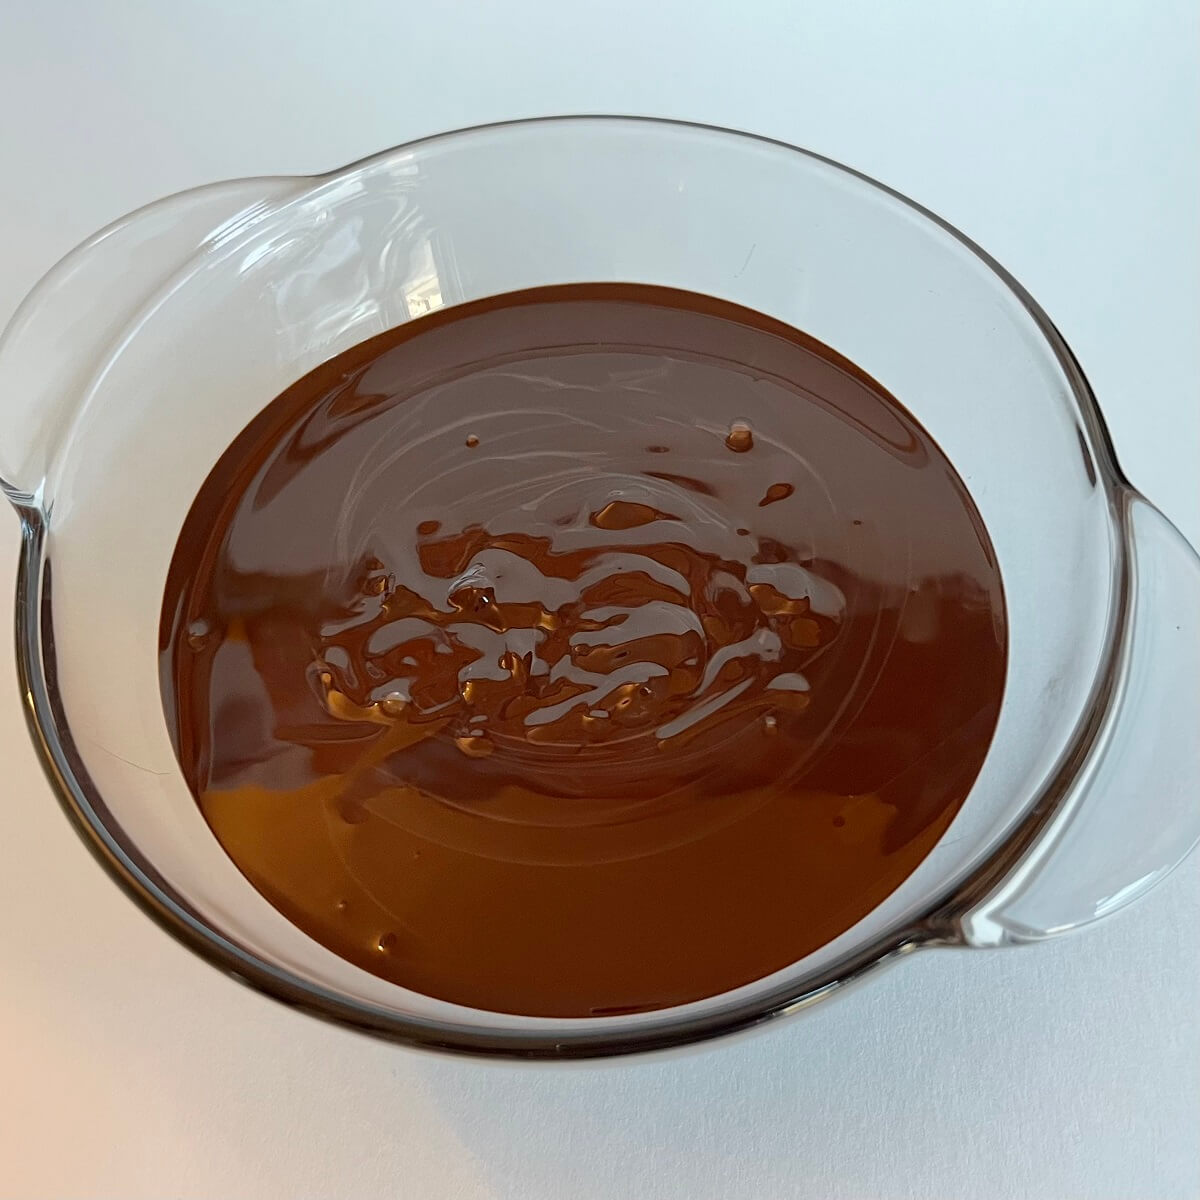 Melted warm dark chocolate in a bowl.